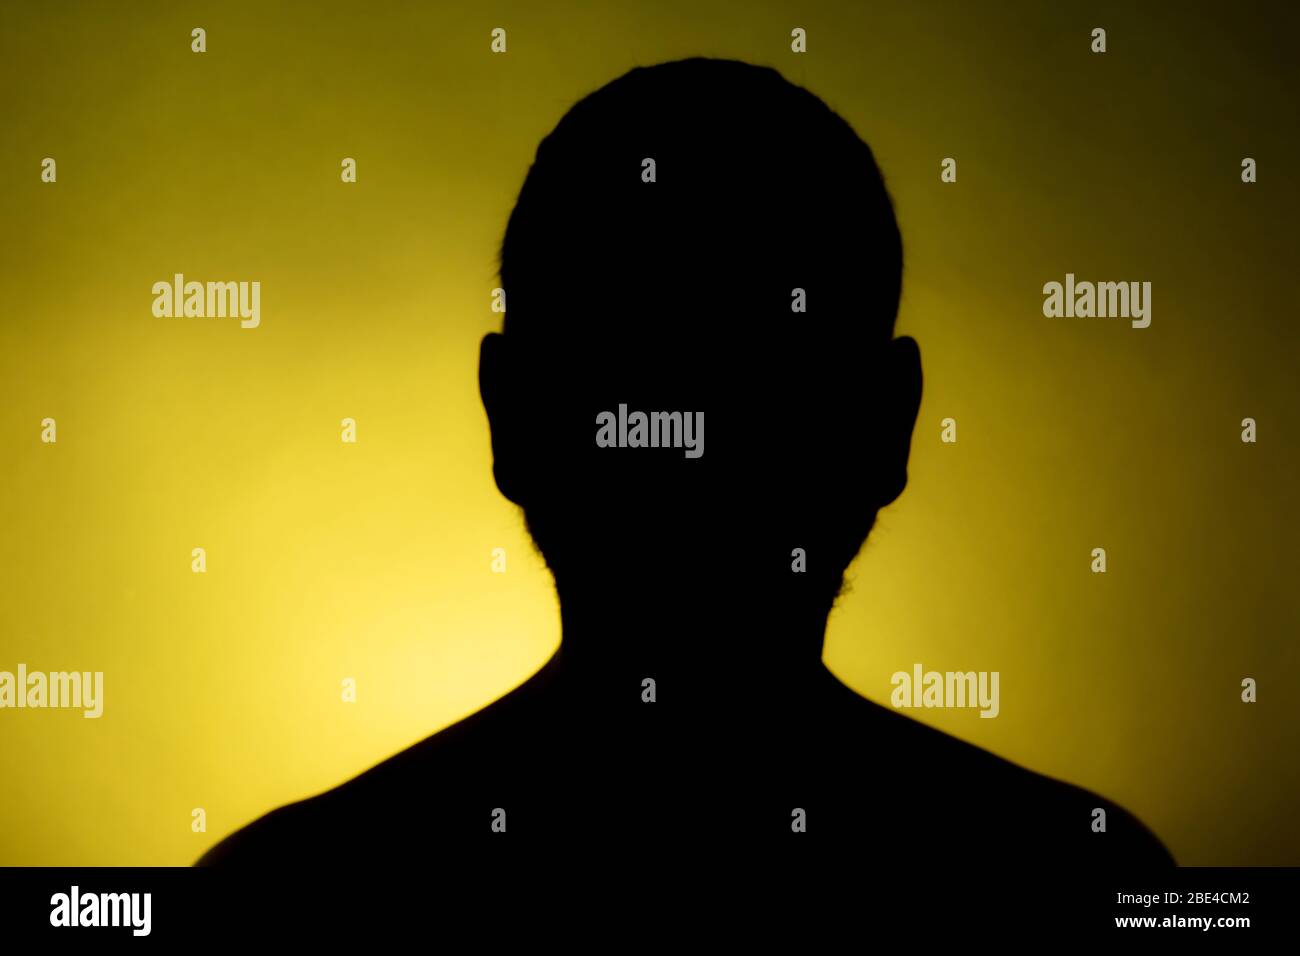 Cleanly defined frontal silhouette of a male person against a blue